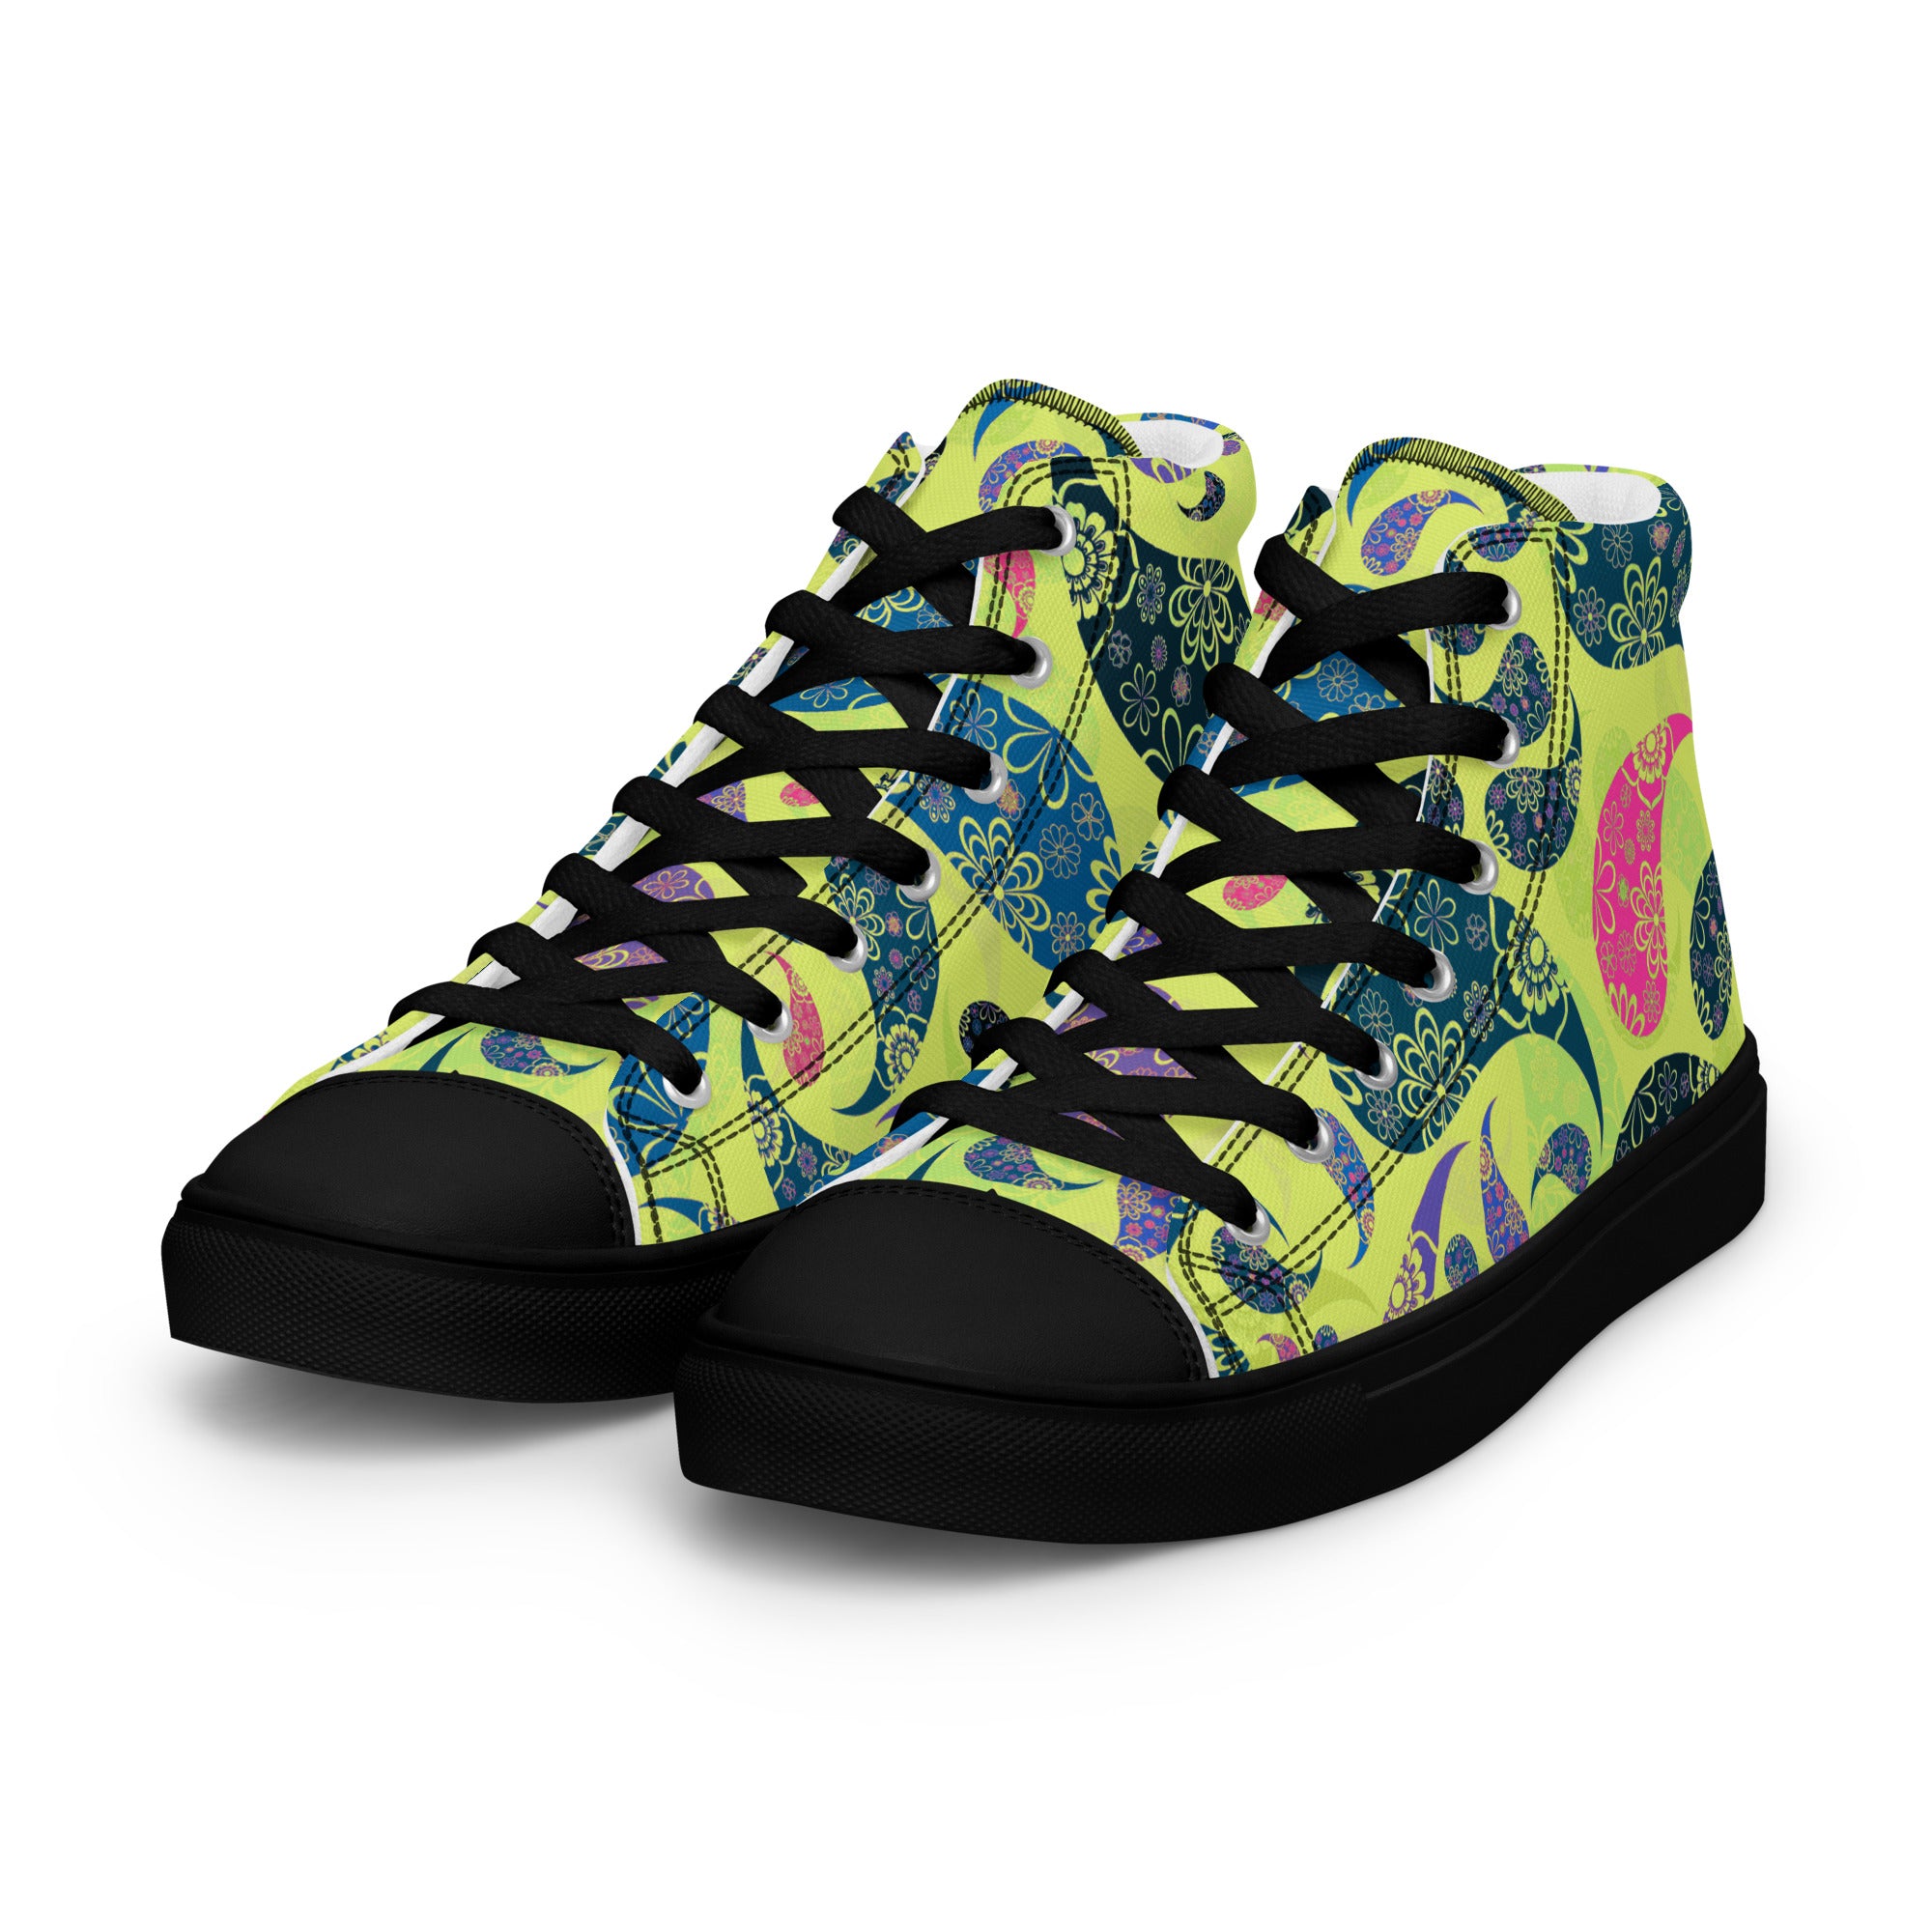 Women’s high top canvas shoes- Paisley Pattern 01